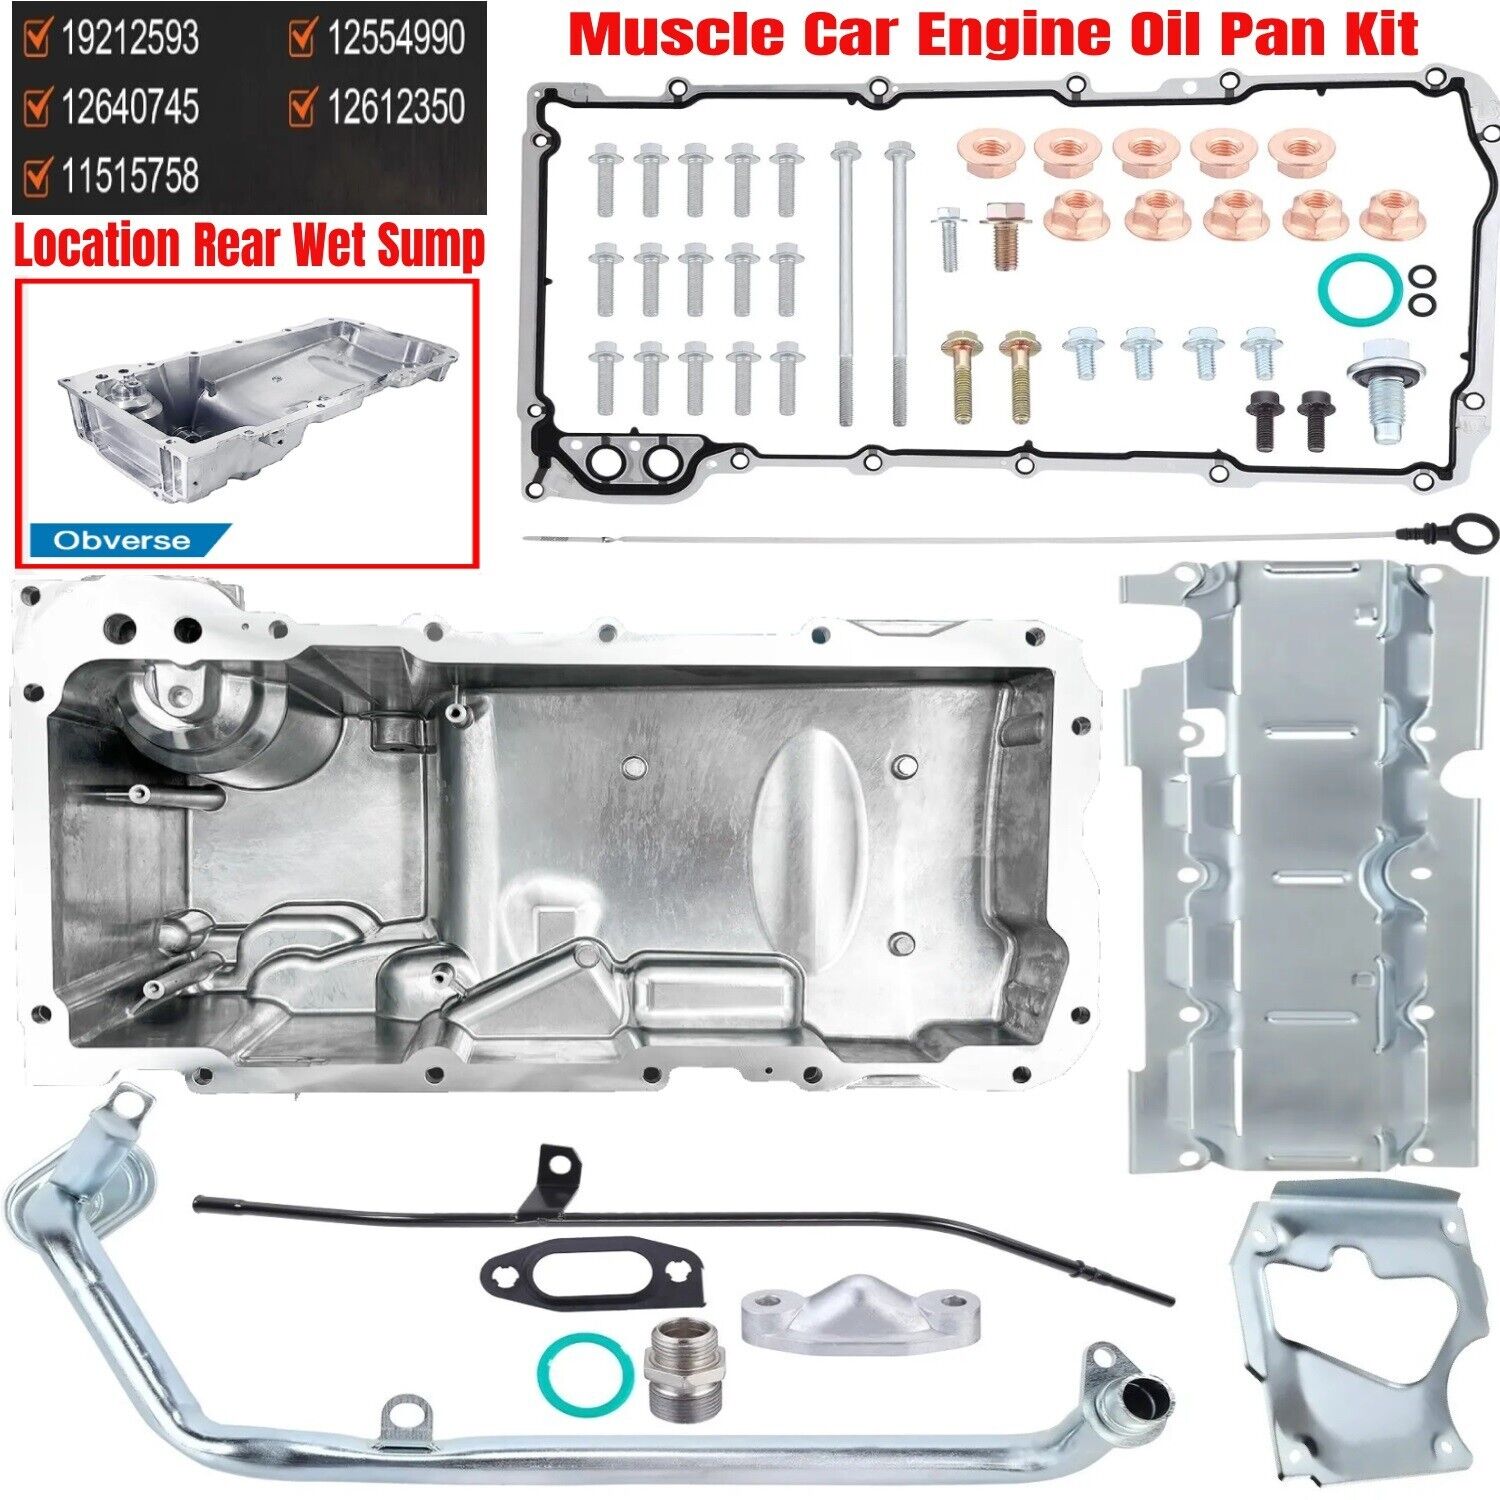 For Chevy GM LS1 LS3 LSA LSX Engines Performance Muscle Car Engine Oil Pan Kit